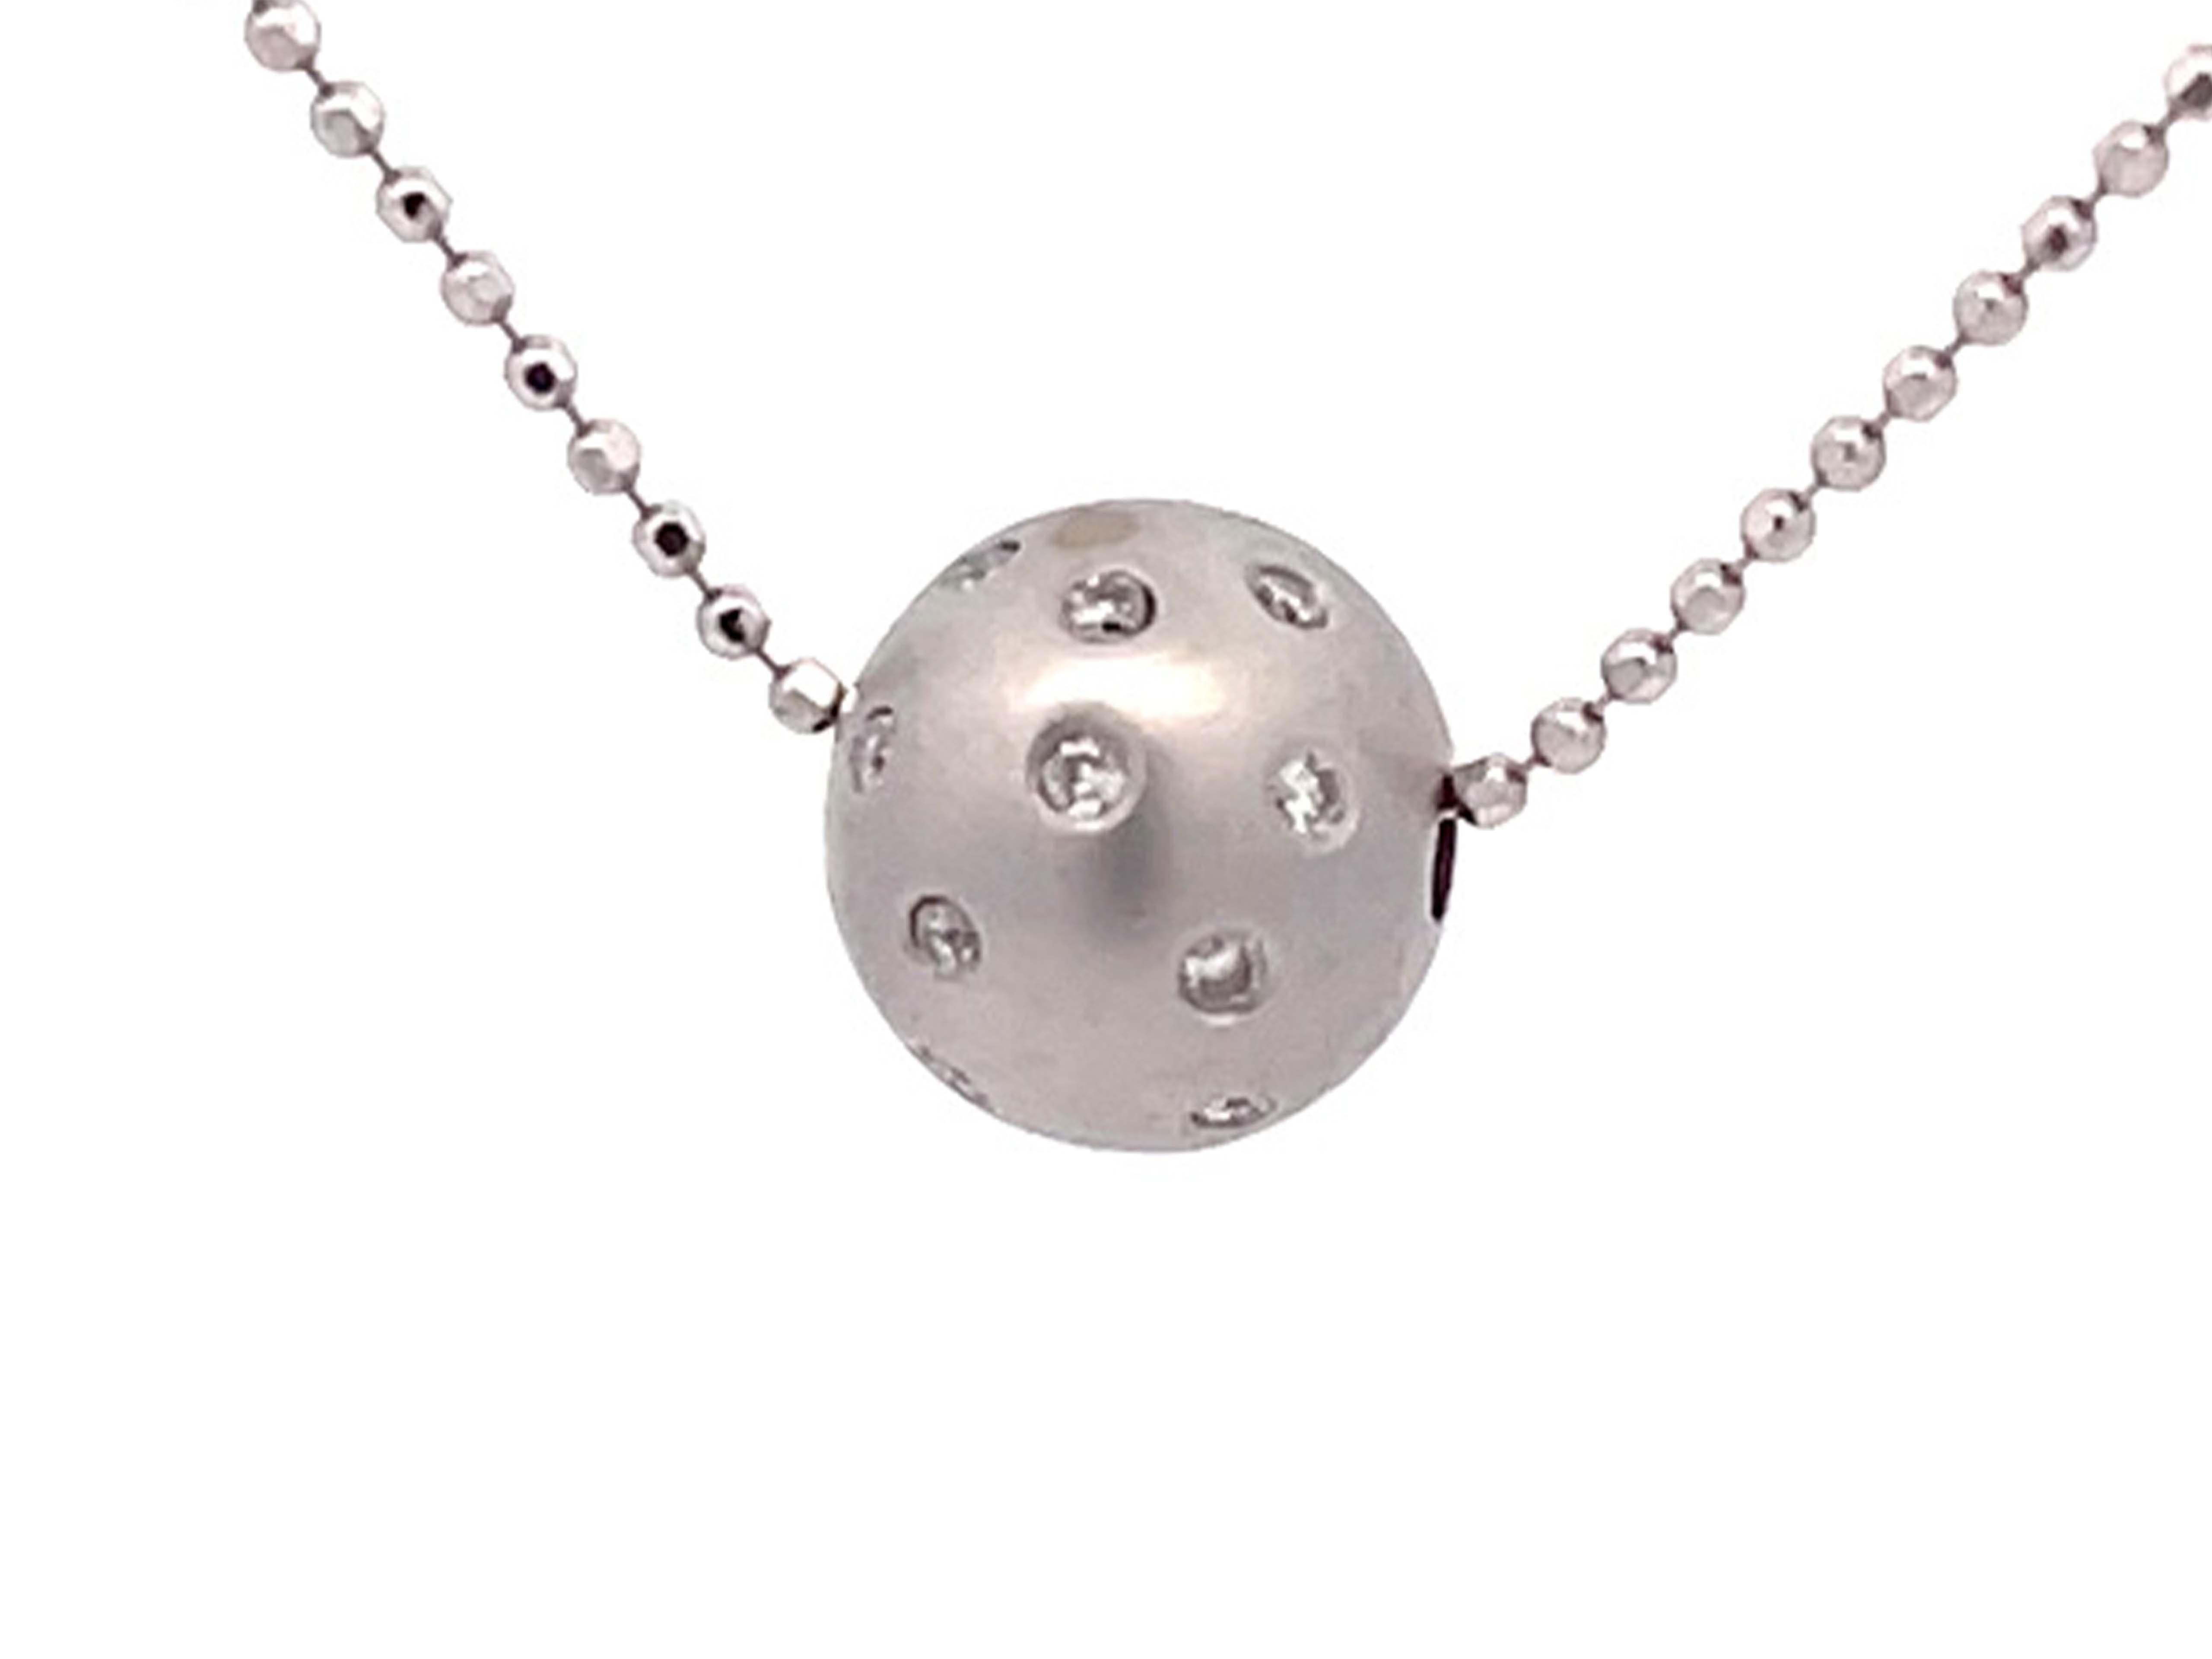 Diamond Ball Necklace in 18k White Gold In Excellent Condition For Sale In Honolulu, HI